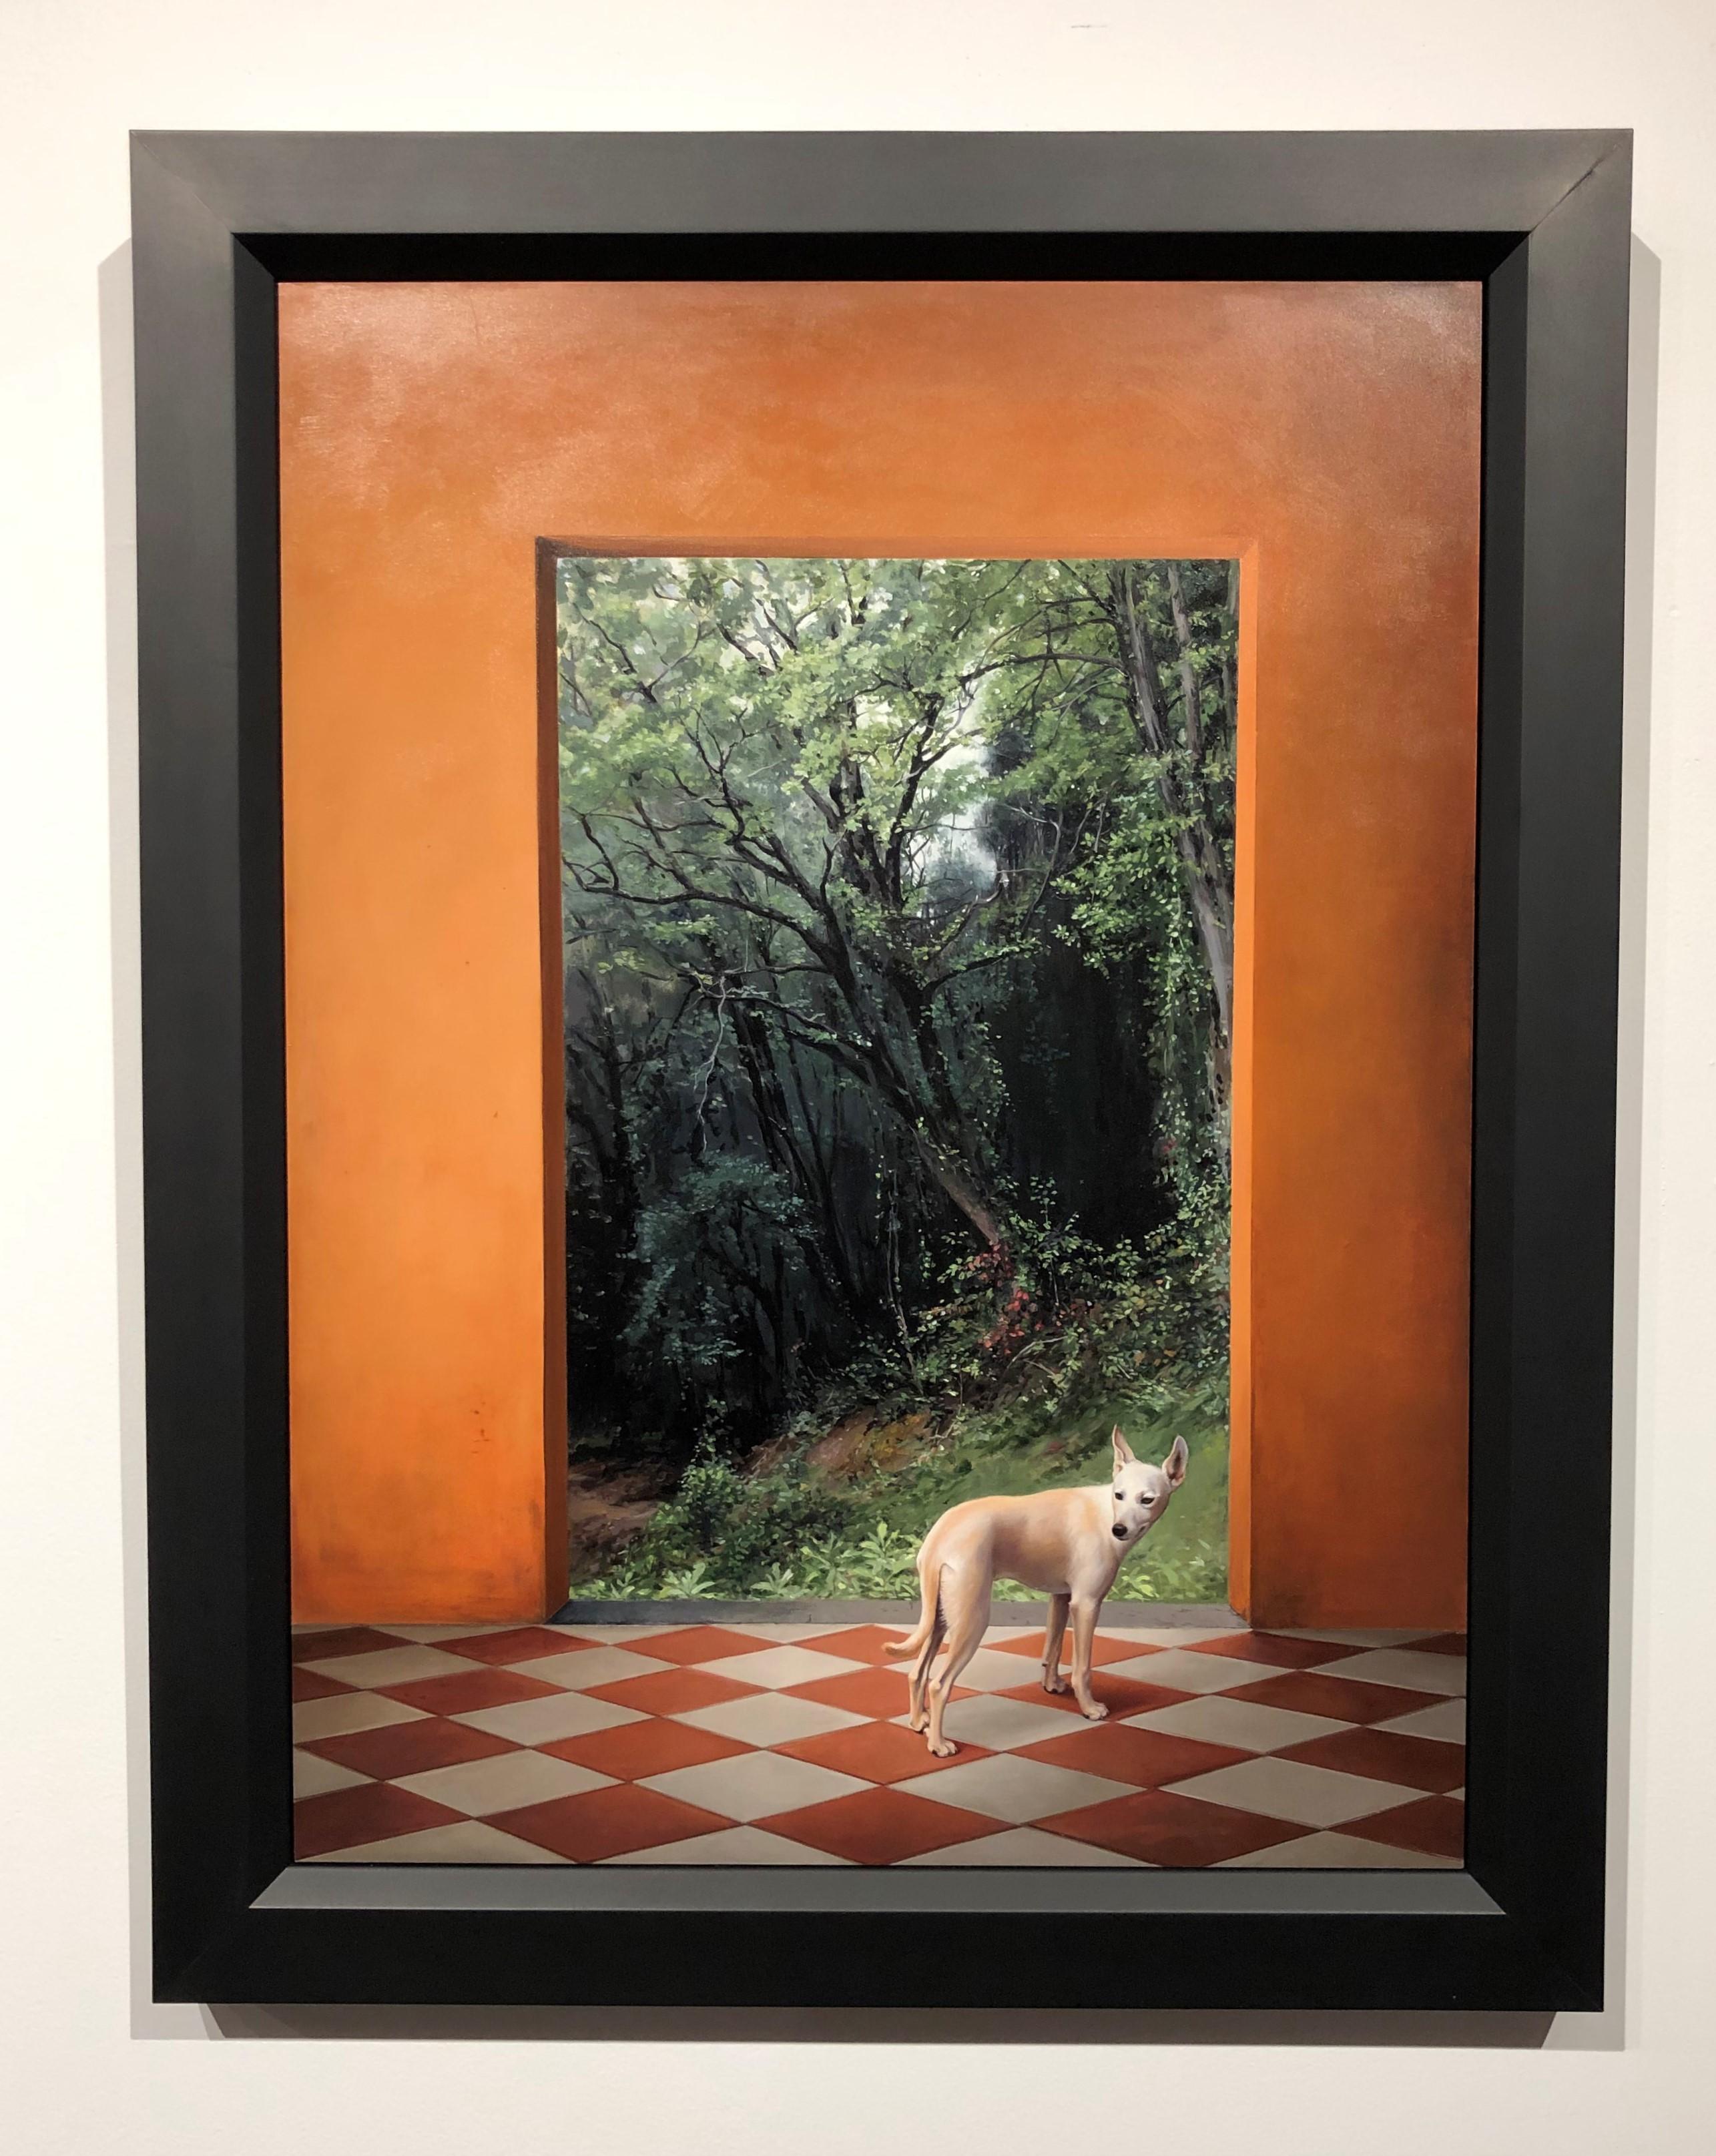 The terra cotta courtyard walls are beautifully paired with the orange and white tile floor in Carol Pylant's painting entitled 